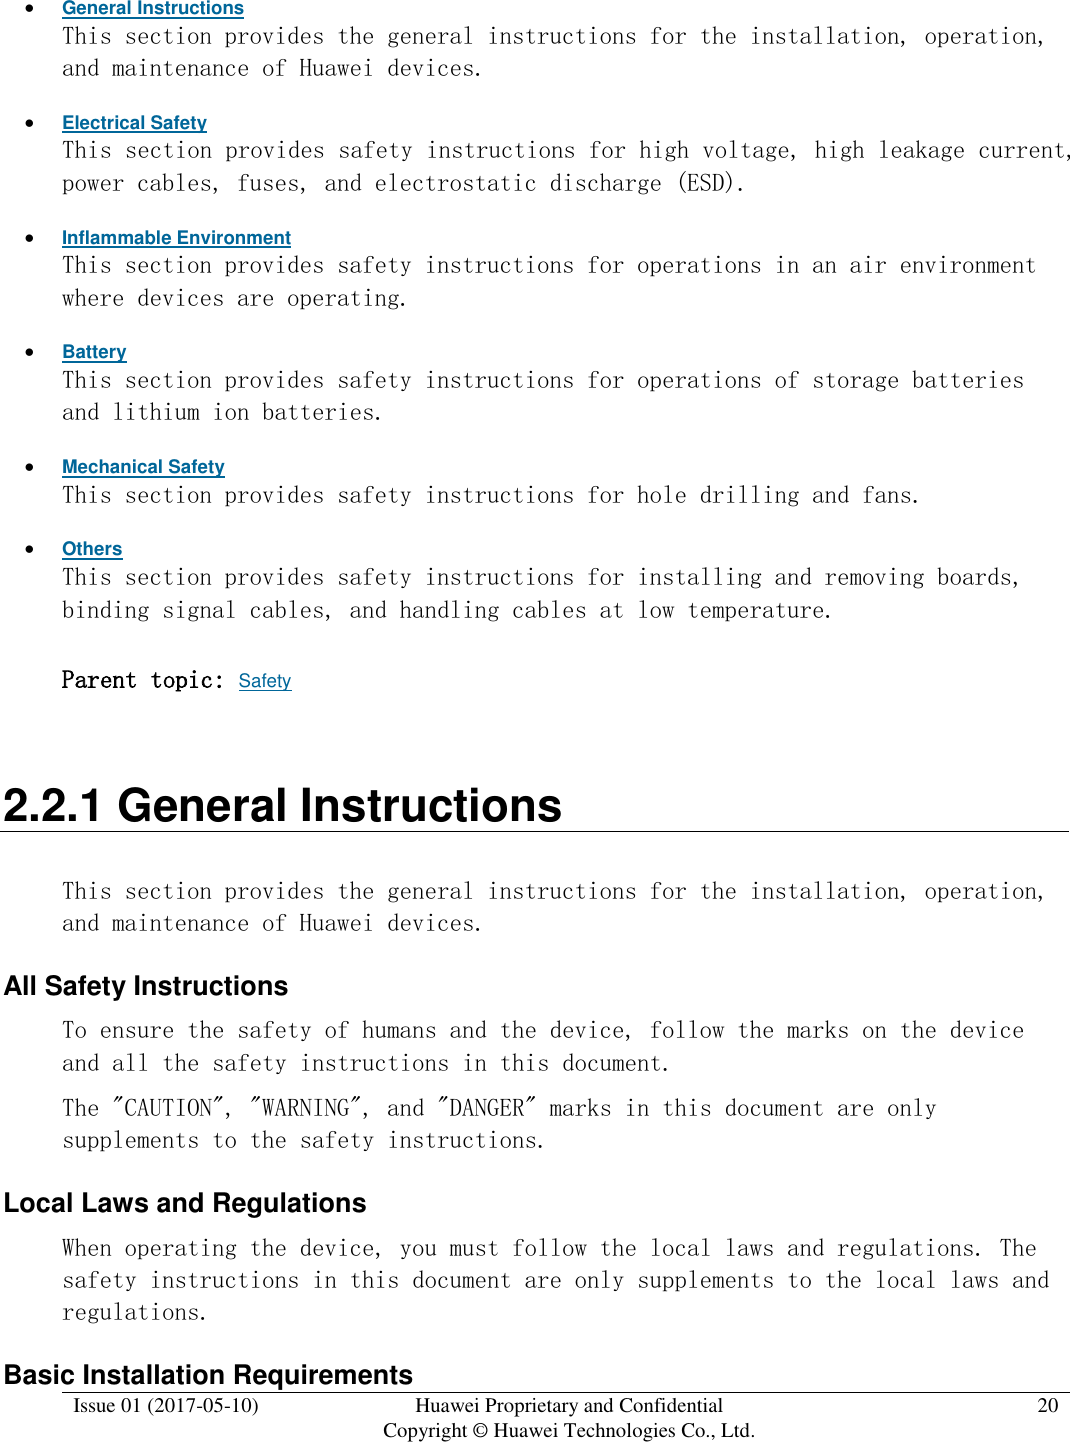  Issue 01 (2017-05-10) Huawei Proprietary and Confidential      Copyright © Huawei Technologies Co., Ltd. 20   General Instructions This section provides the general instructions for the installation, operation, and maintenance of Huawei devices.  Electrical Safety This section provides safety instructions for high voltage, high leakage current, power cables, fuses, and electrostatic discharge (ESD).  Inflammable Environment This section provides safety instructions for operations in an air environment where devices are operating.  Battery This section provides safety instructions for operations of storage batteries and lithium ion batteries.  Mechanical Safety This section provides safety instructions for hole drilling and fans.  Others This section provides safety instructions for installing and removing boards, binding signal cables, and handling cables at low temperature.  Parent topic: Safety 2.2.1 General Instructions This section provides the general instructions for the installation, operation, and maintenance of Huawei devices. All Safety Instructions To ensure the safety of humans and the device, follow the marks on the device and all the safety instructions in this document.  The &quot;CAUTION&quot;, &quot;WARNING&quot;, and &quot;DANGER&quot; marks in this document are only supplements to the safety instructions.  Local Laws and Regulations  When operating the device, you must follow the local laws and regulations. The safety instructions in this document are only supplements to the local laws and regulations.  Basic Installation Requirements 